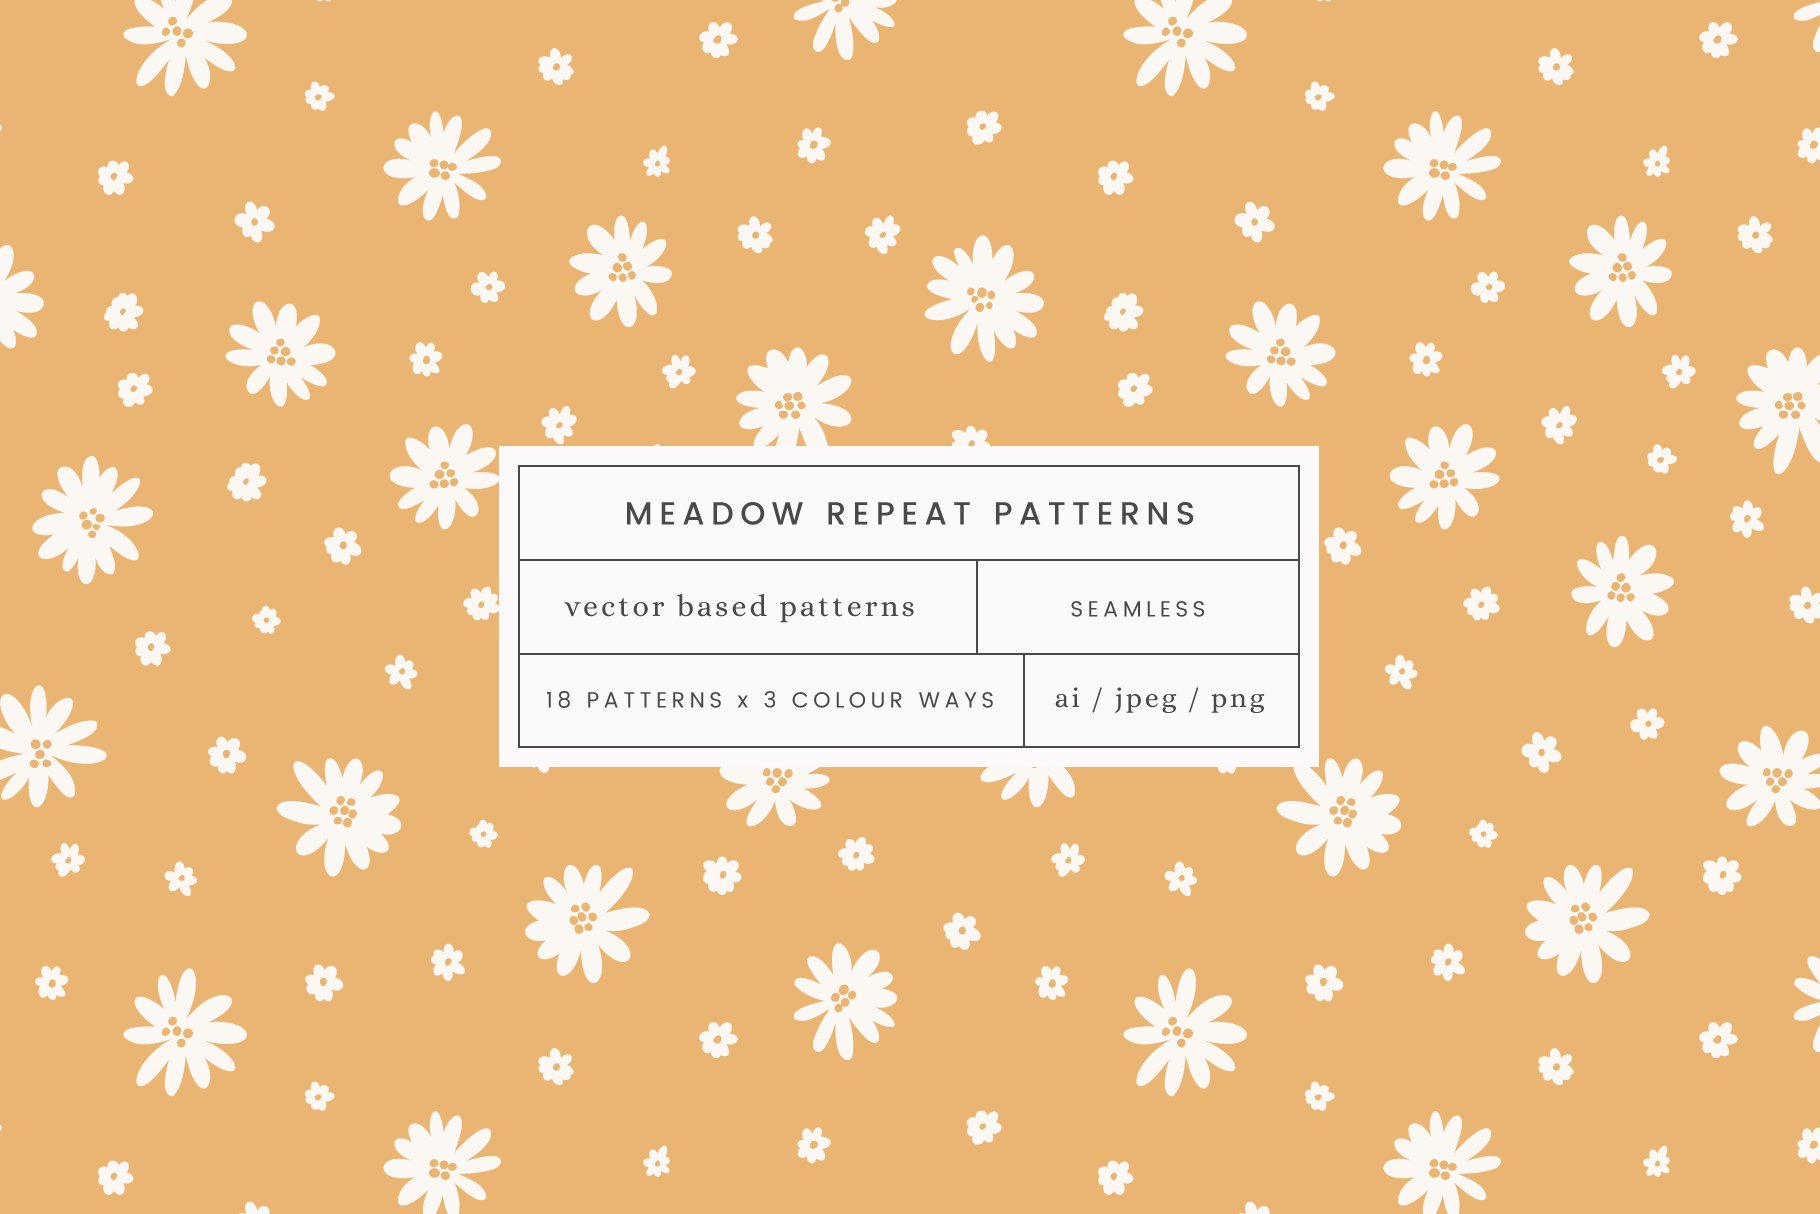 Meadow Flower Repeat Patterns cover image.